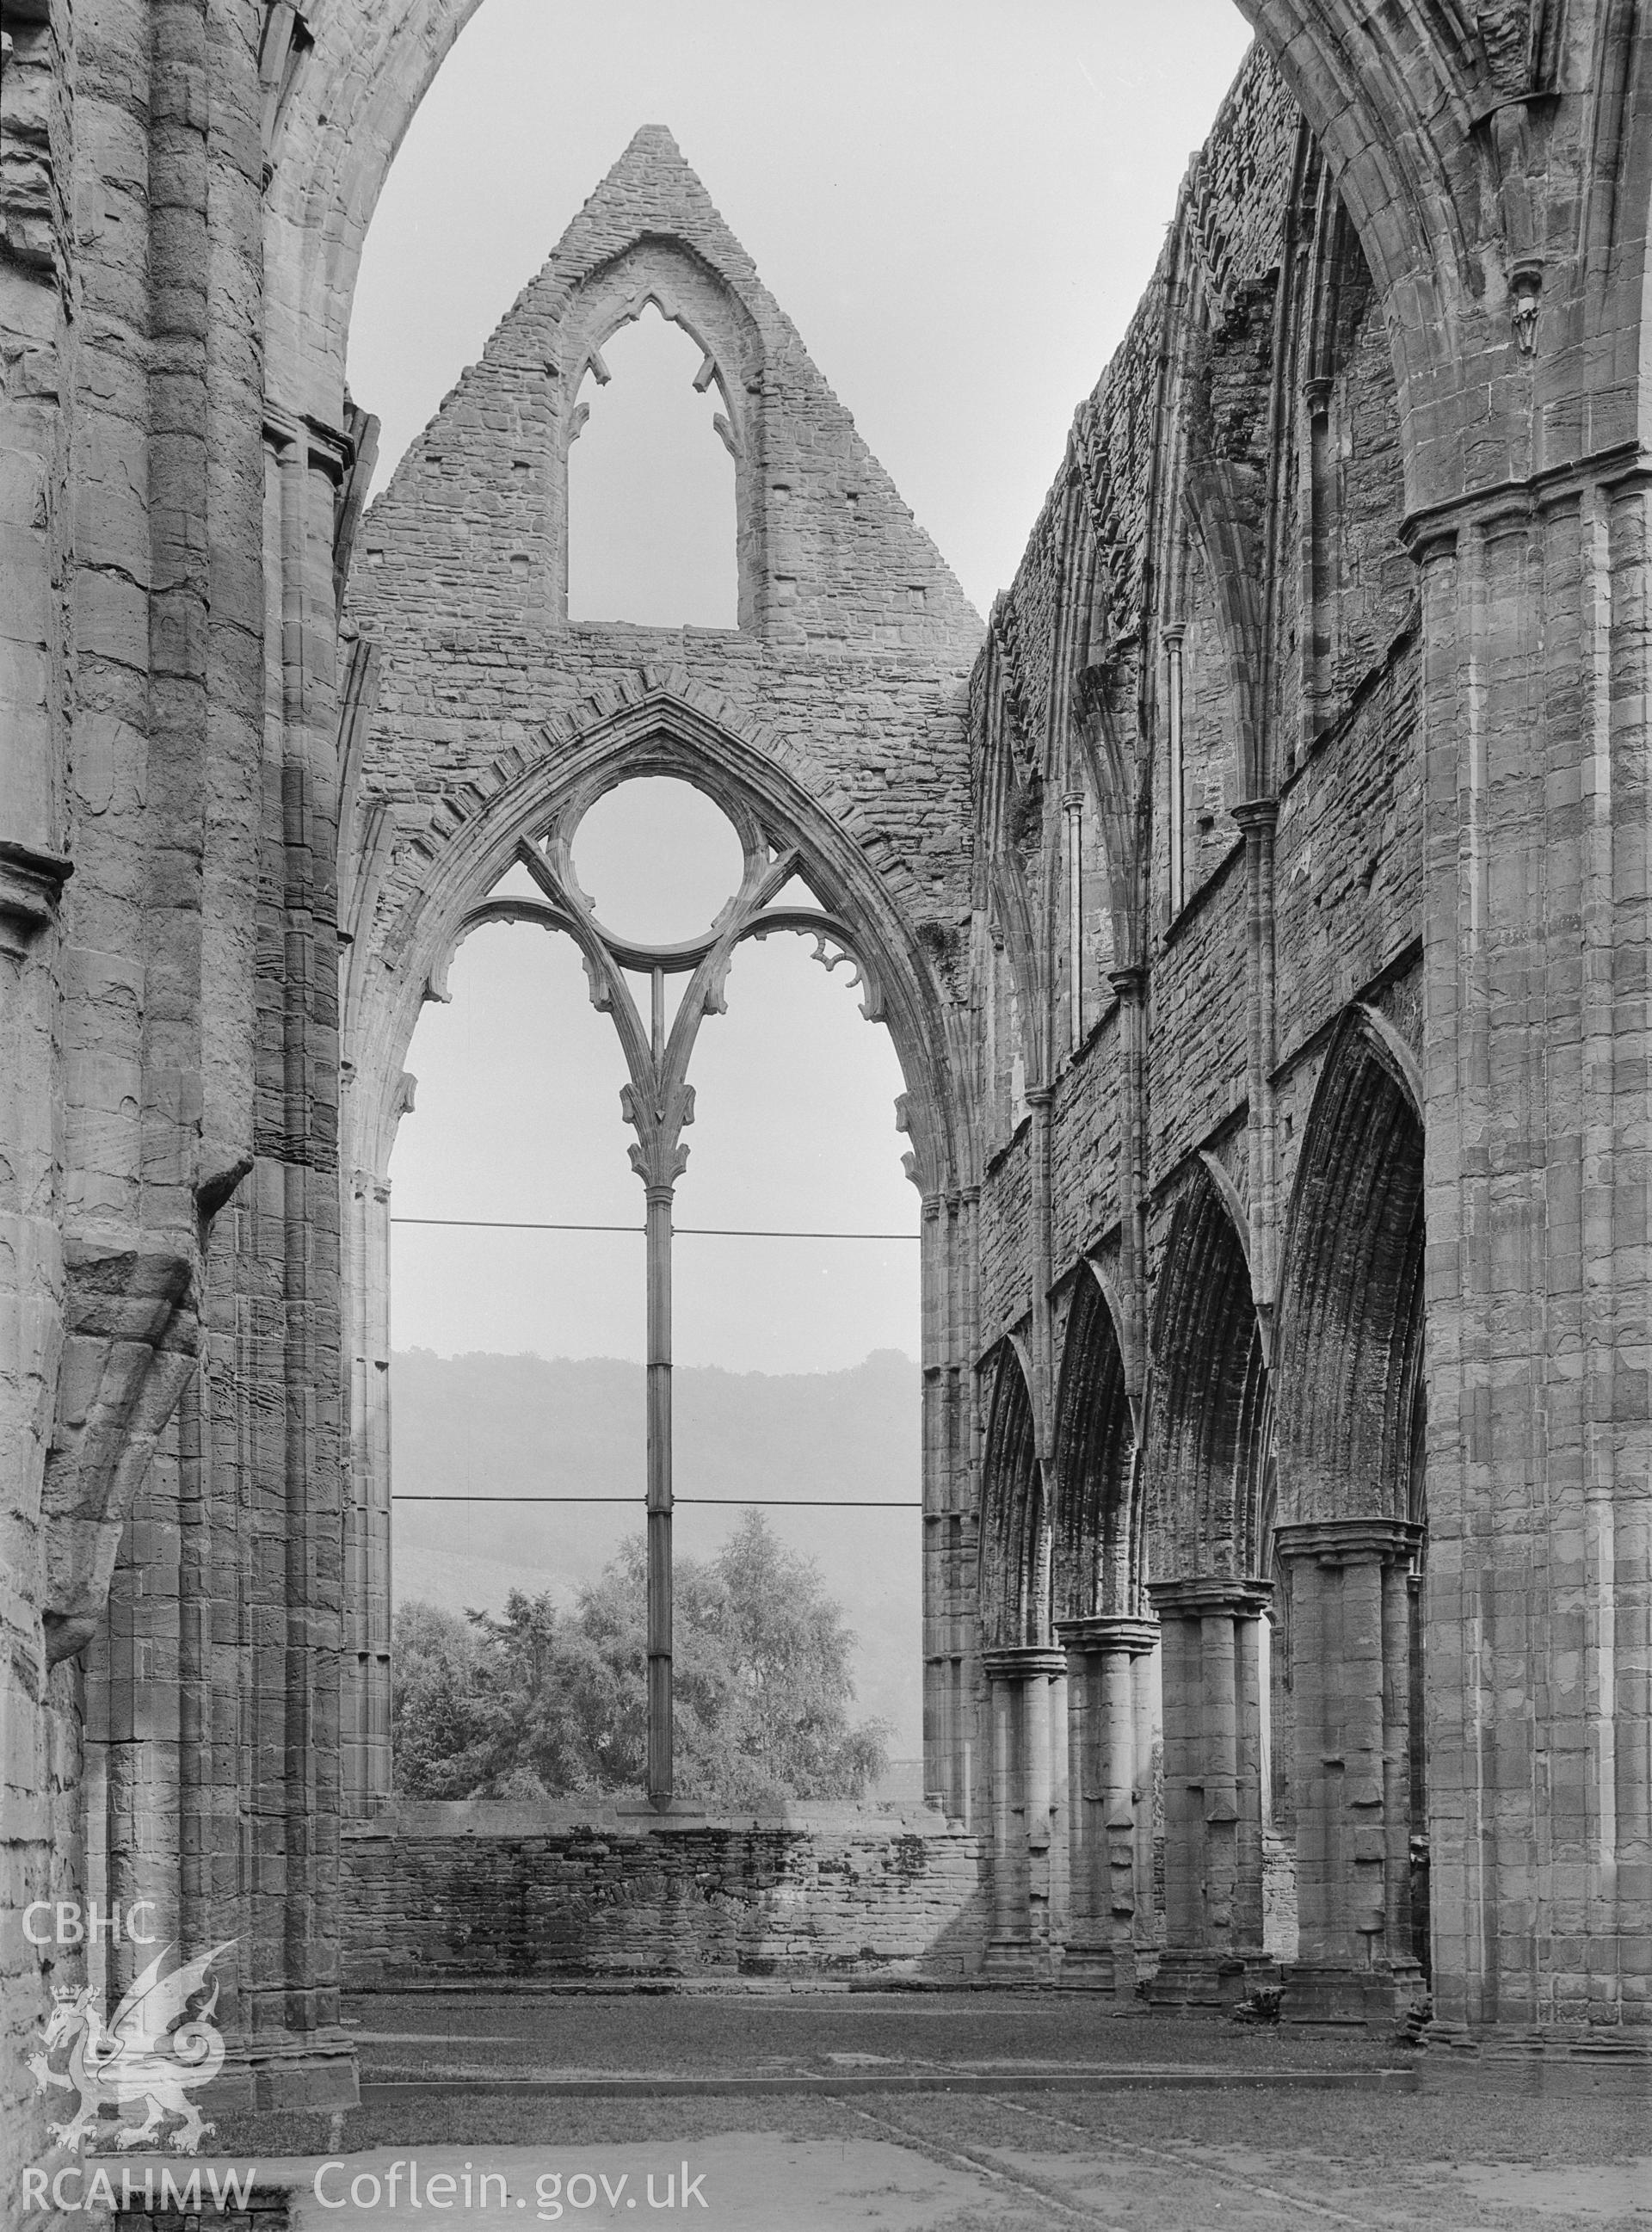 Interior view of Tintern Abbey from the west, taken by Clayton.